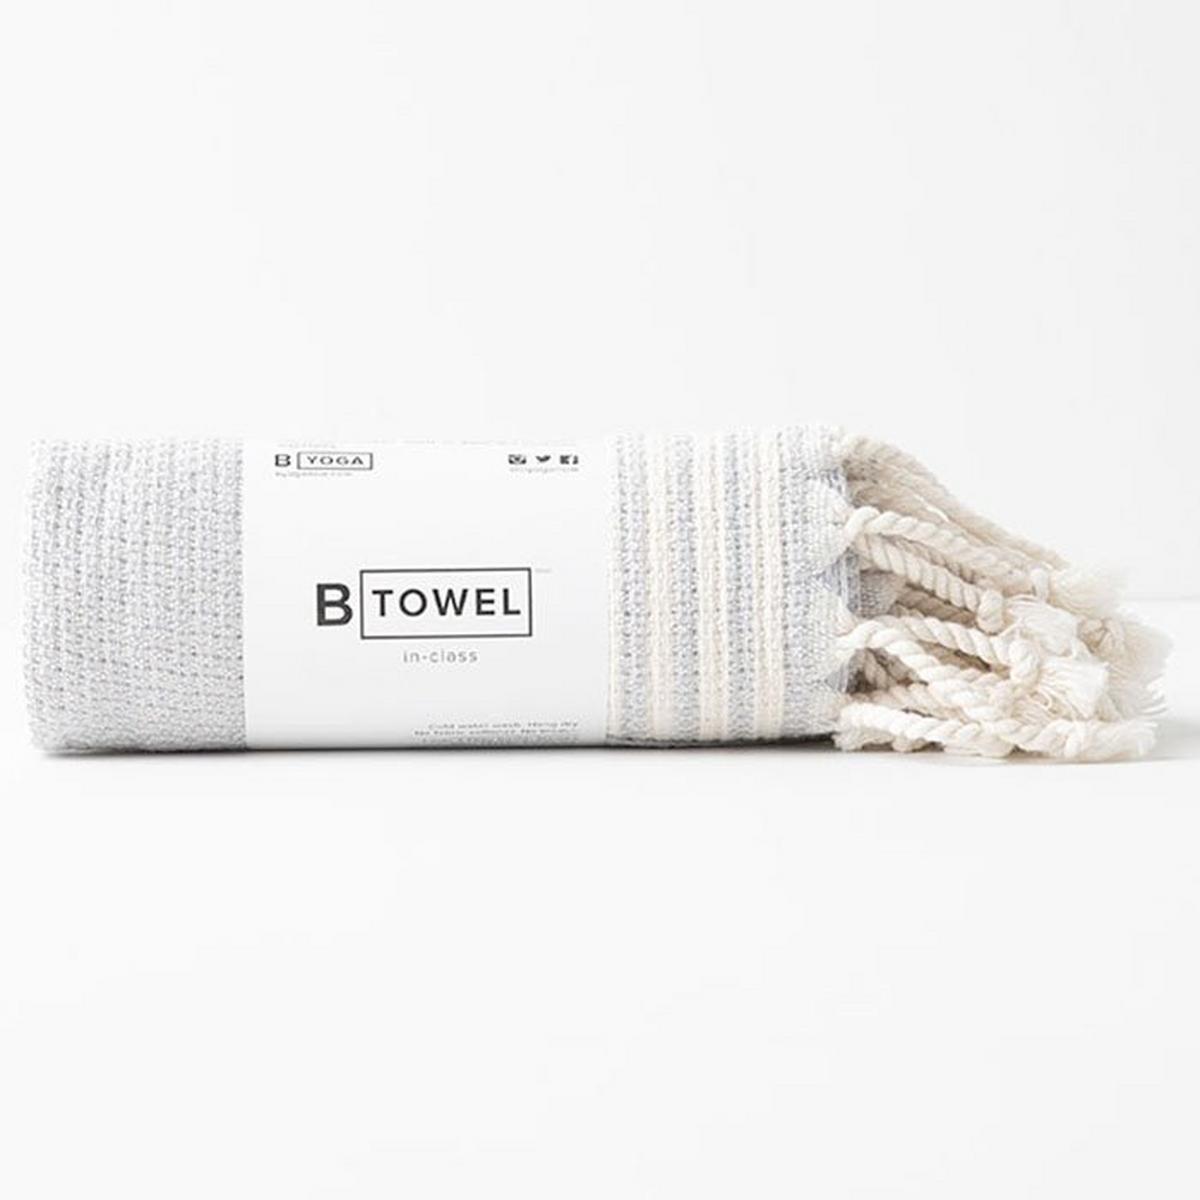 The Hand + Face Towel